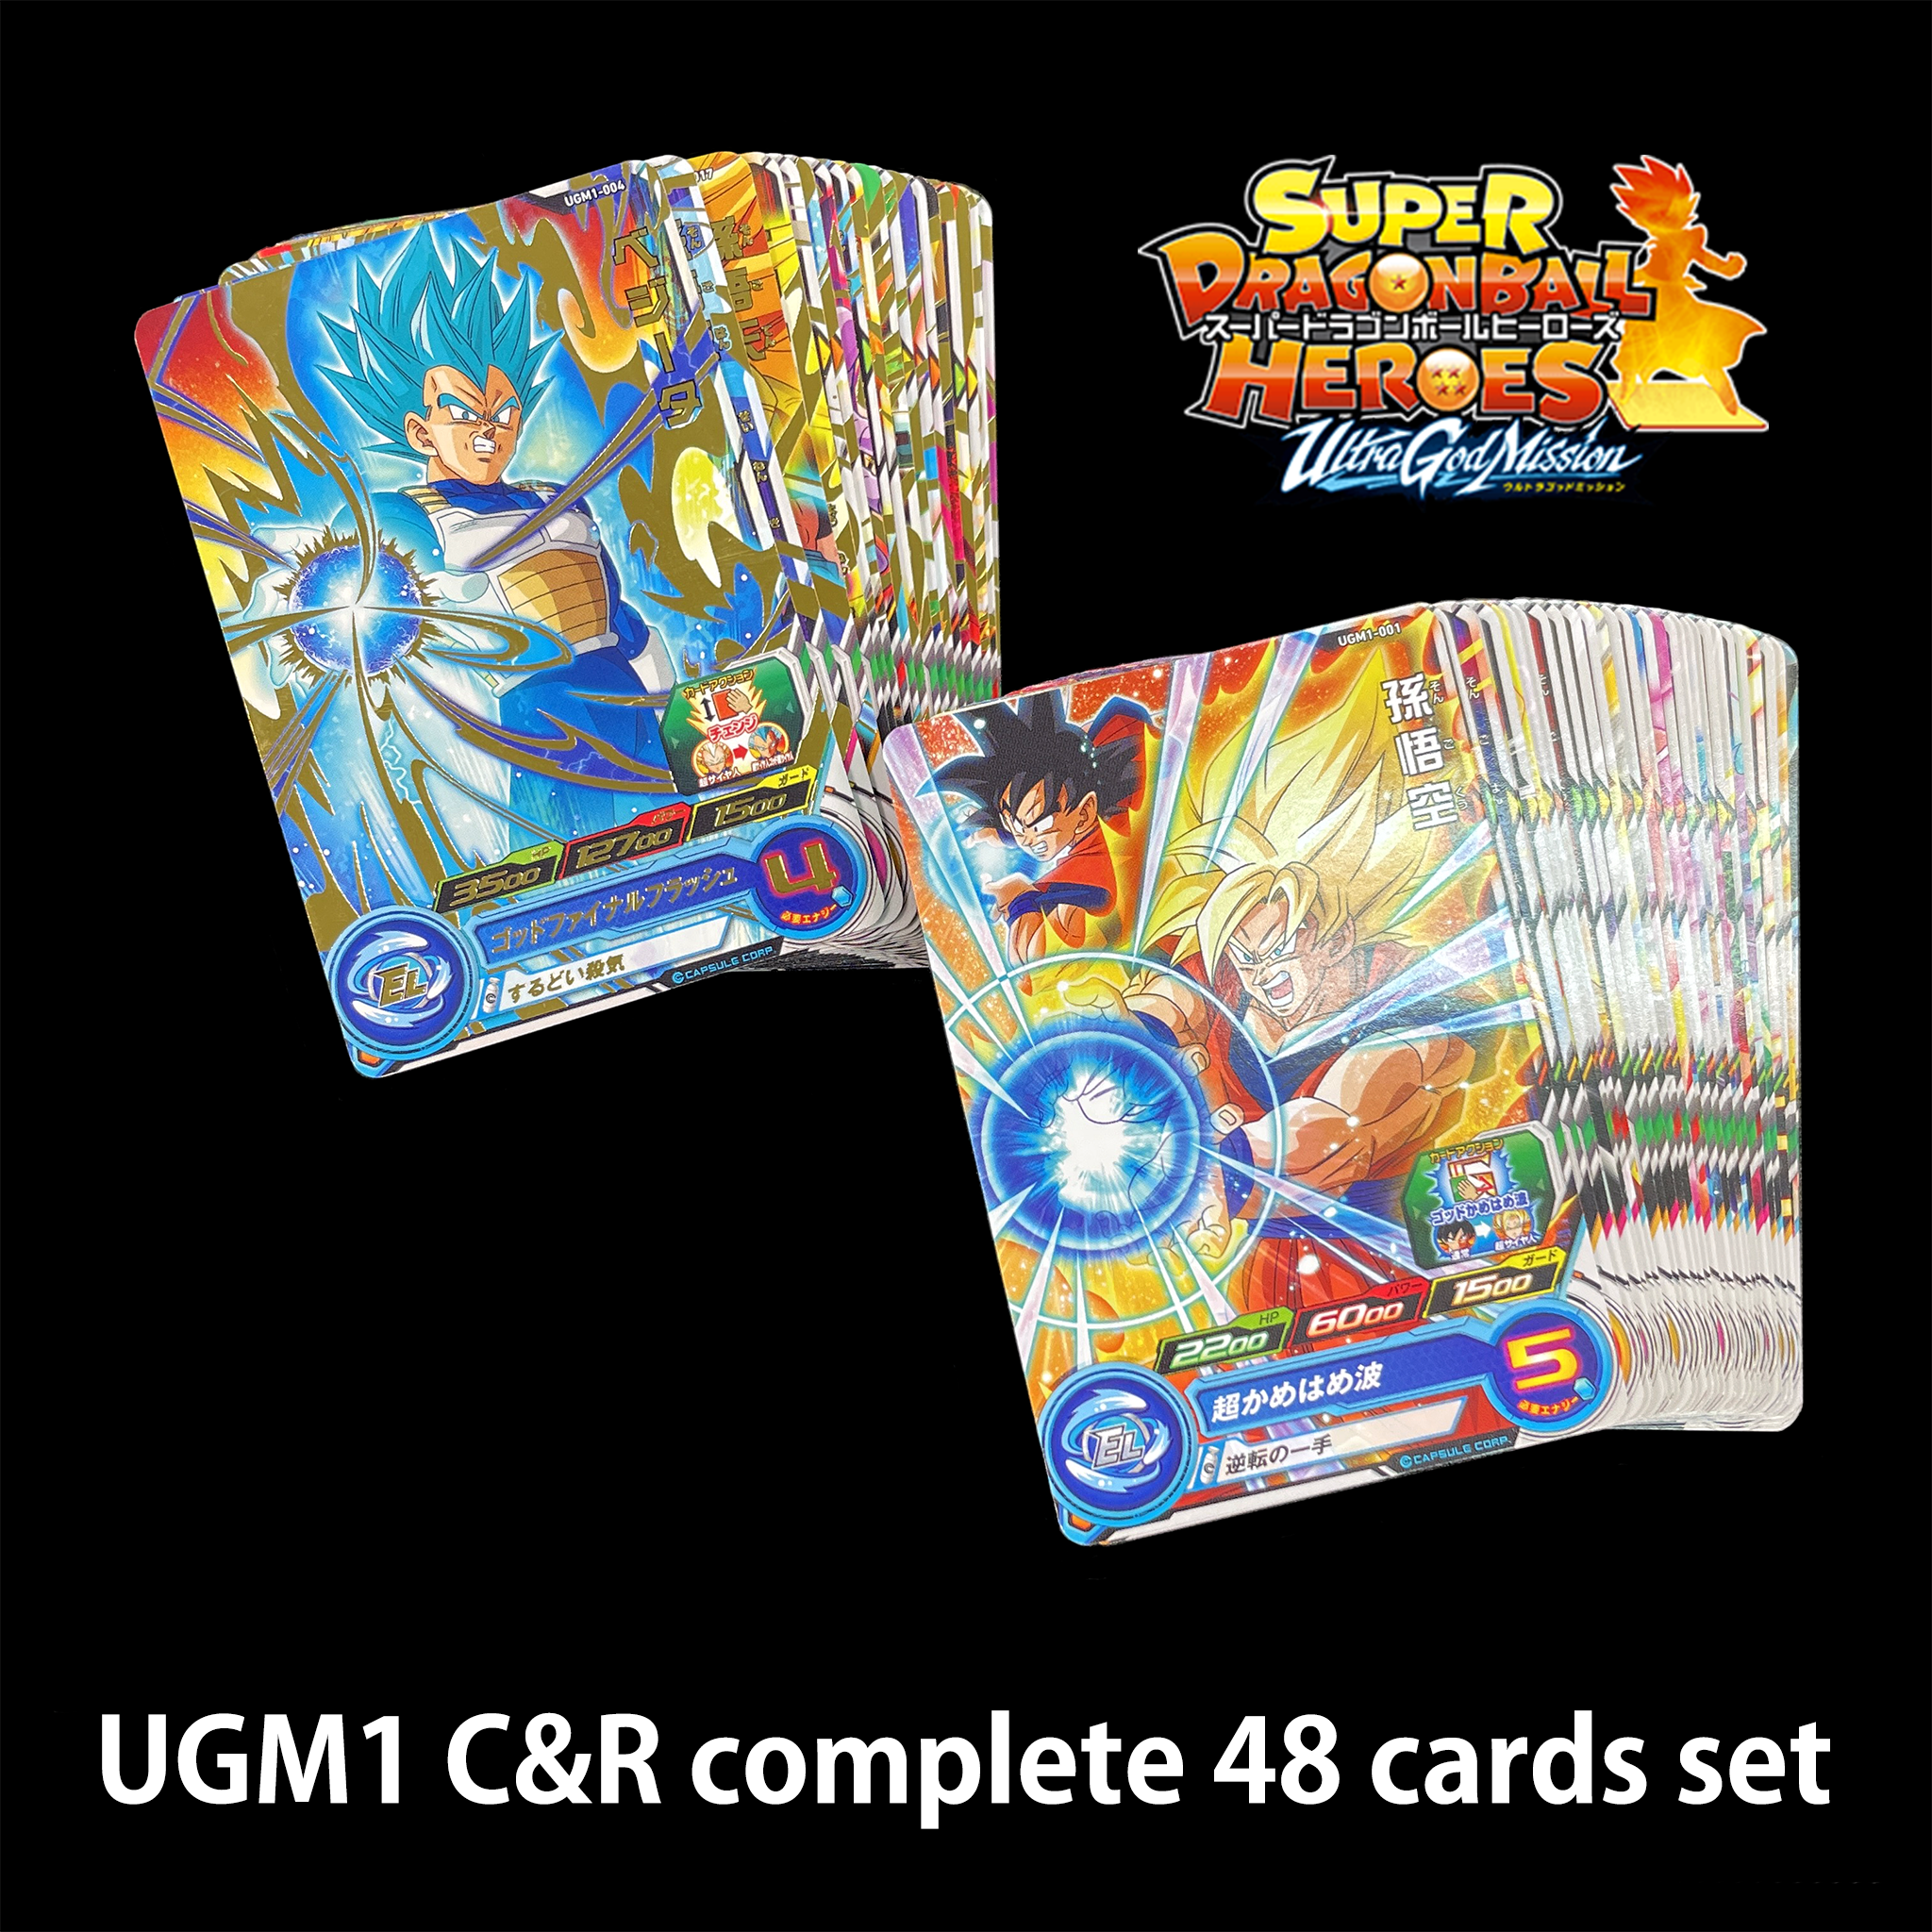 SUPER DRAGON BALL HEROES ULTRA GOD MISSION 1 C&R complete 48 cards set      30 Common cards     18 Rare cards